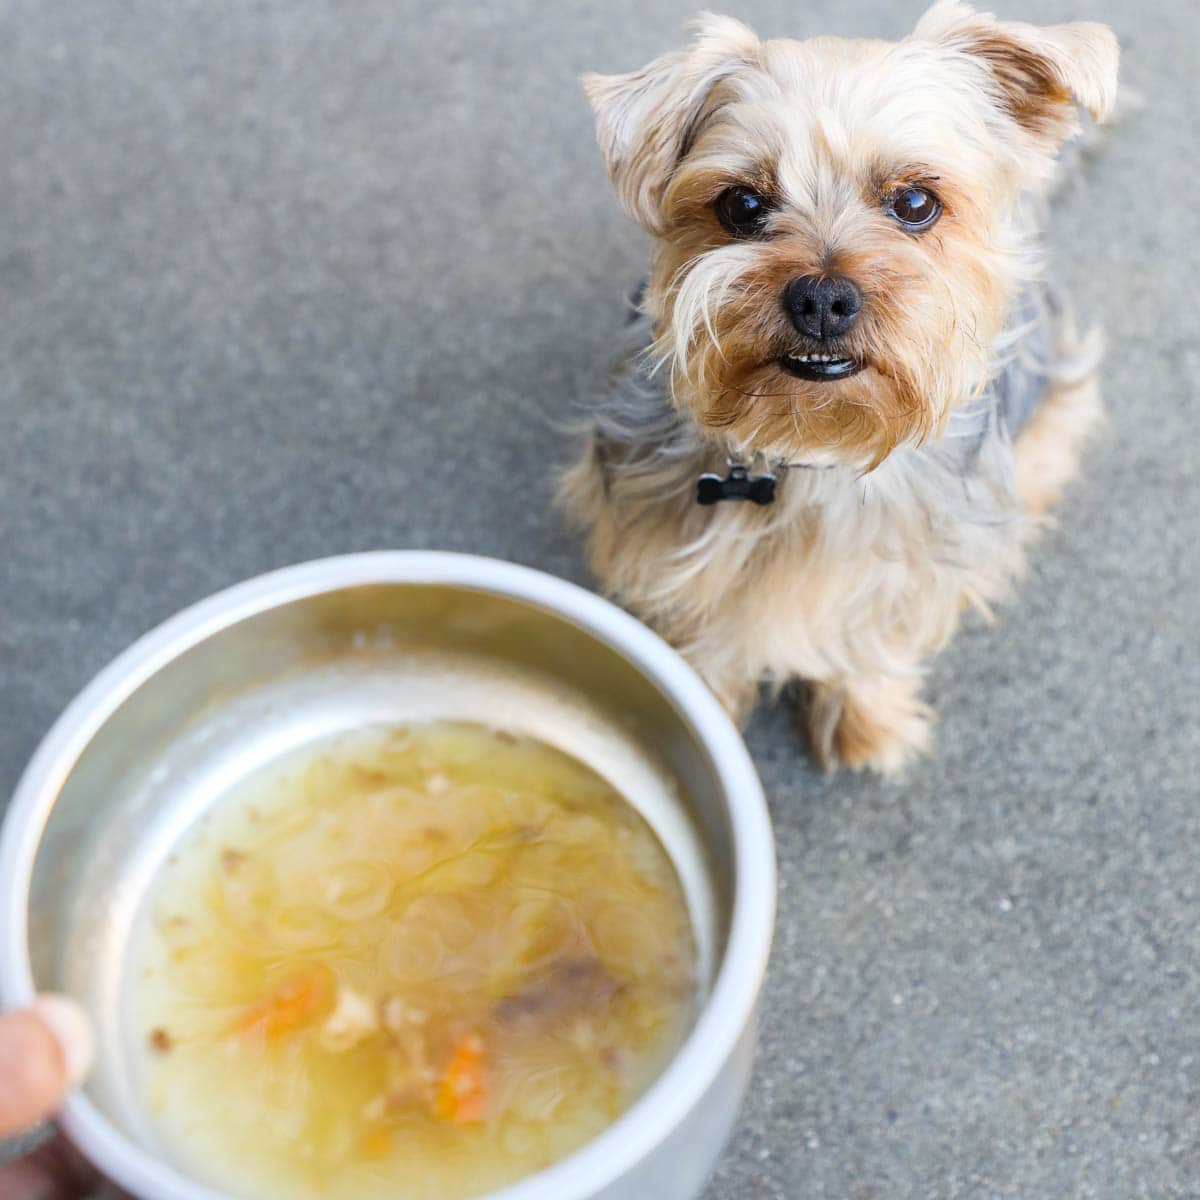 How To Make Beef Bone Broth For Dogs